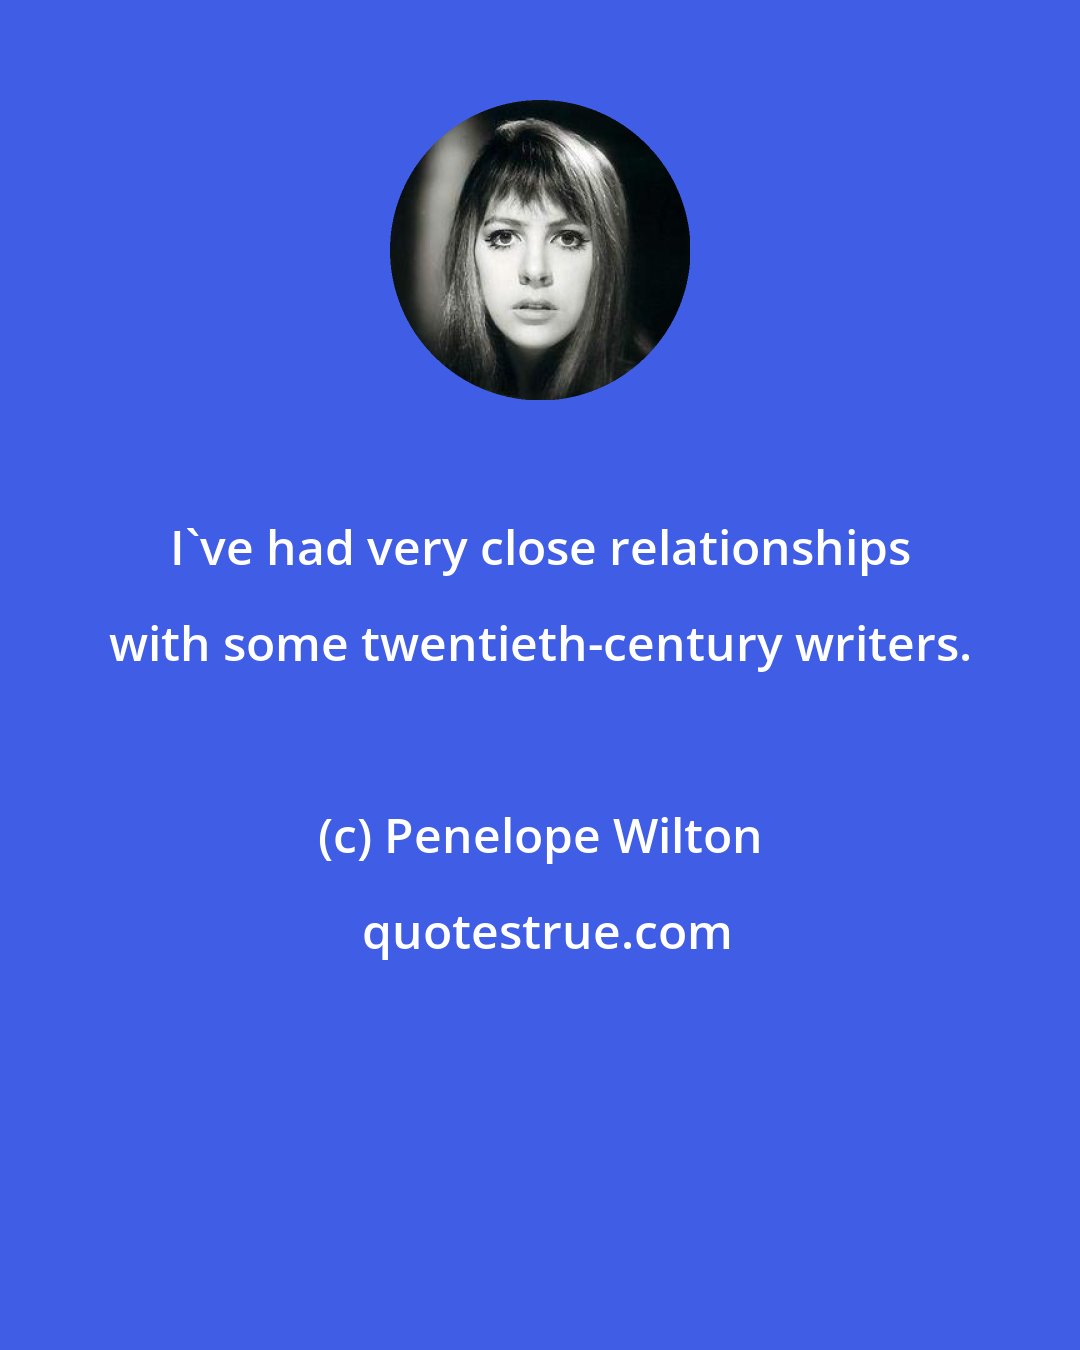 Penelope Wilton: I've had very close relationships with some twentieth-century writers.